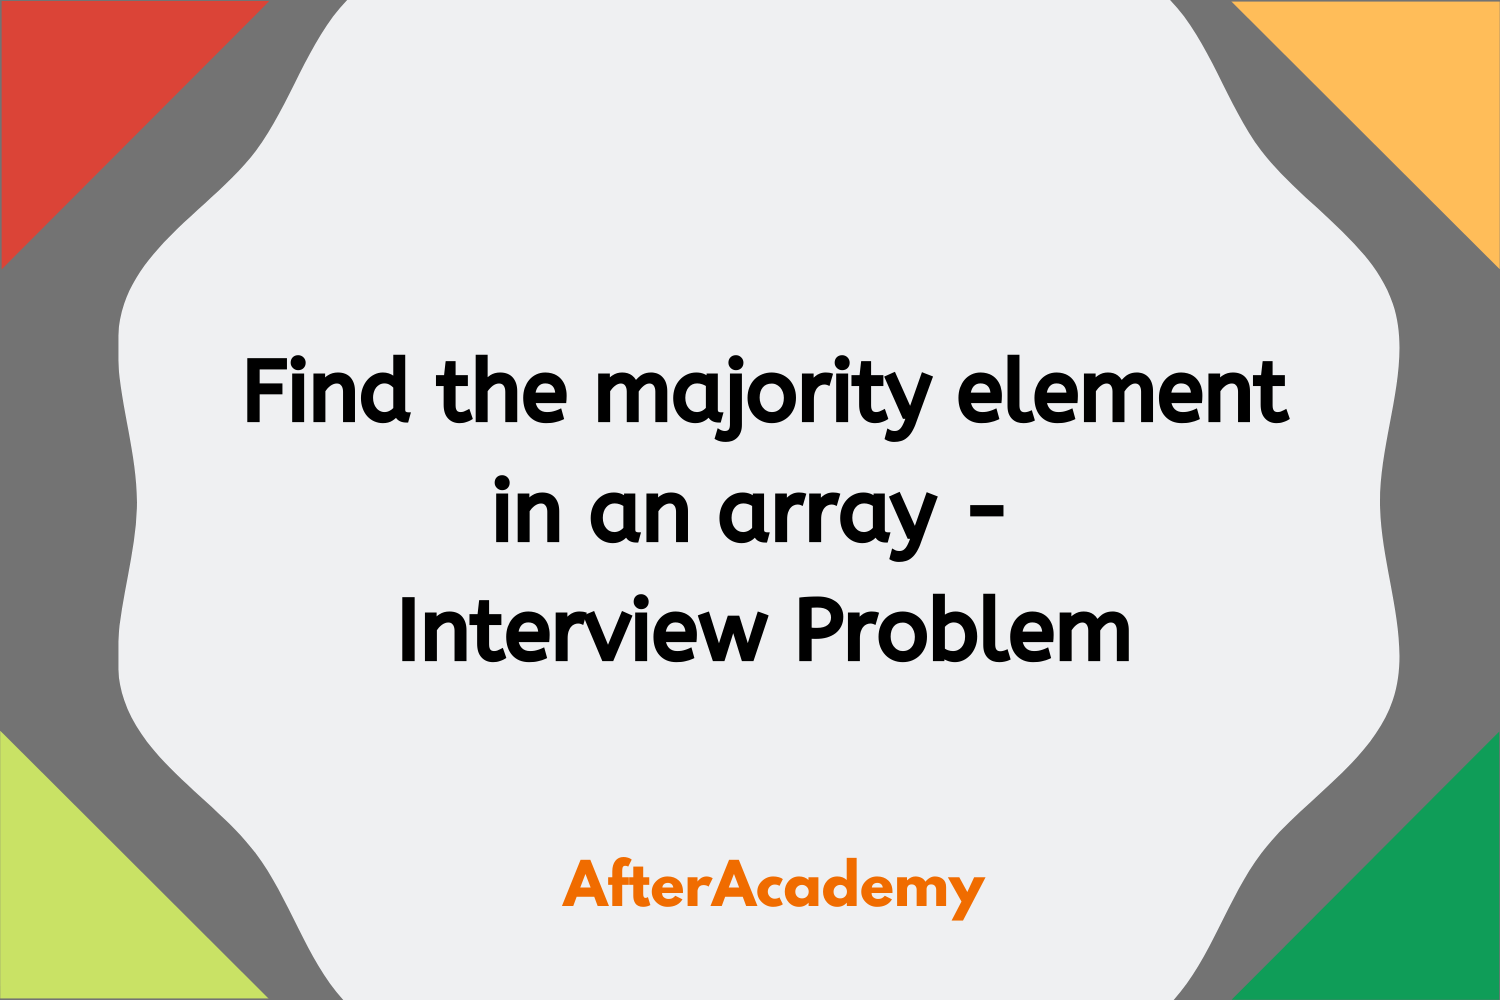 Find the majority element in an array - Interview Problem